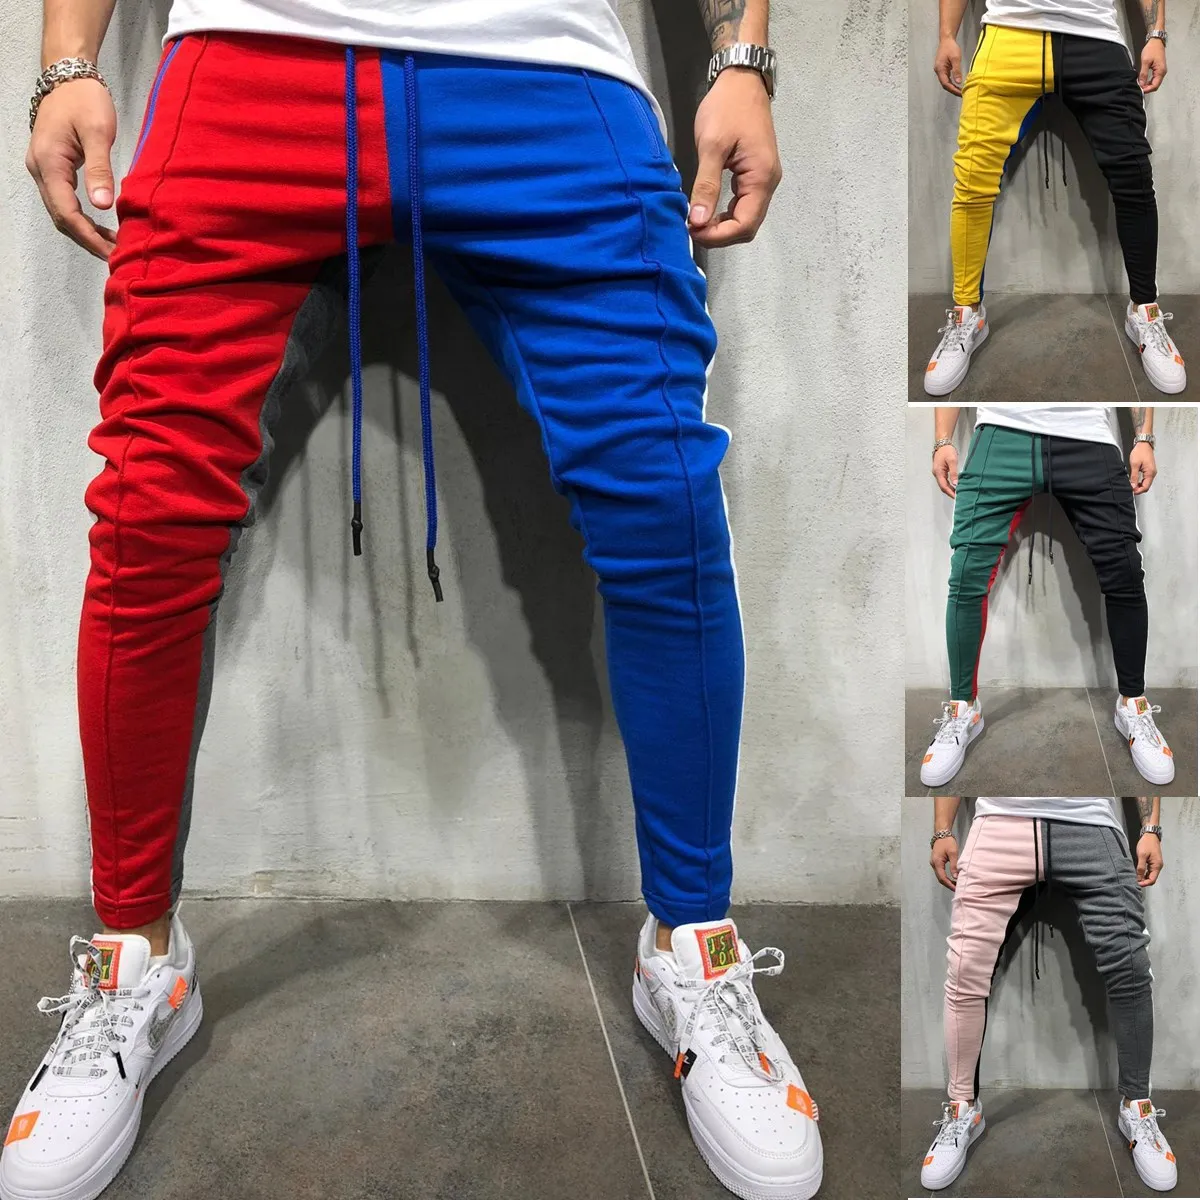 

ZOGAA 2021 New Pants Men's Fashion Hip-Hop Style Trousers Color-Blocked Lace-Up Men's Slim Bottoms Individual Streetwear S-3XL